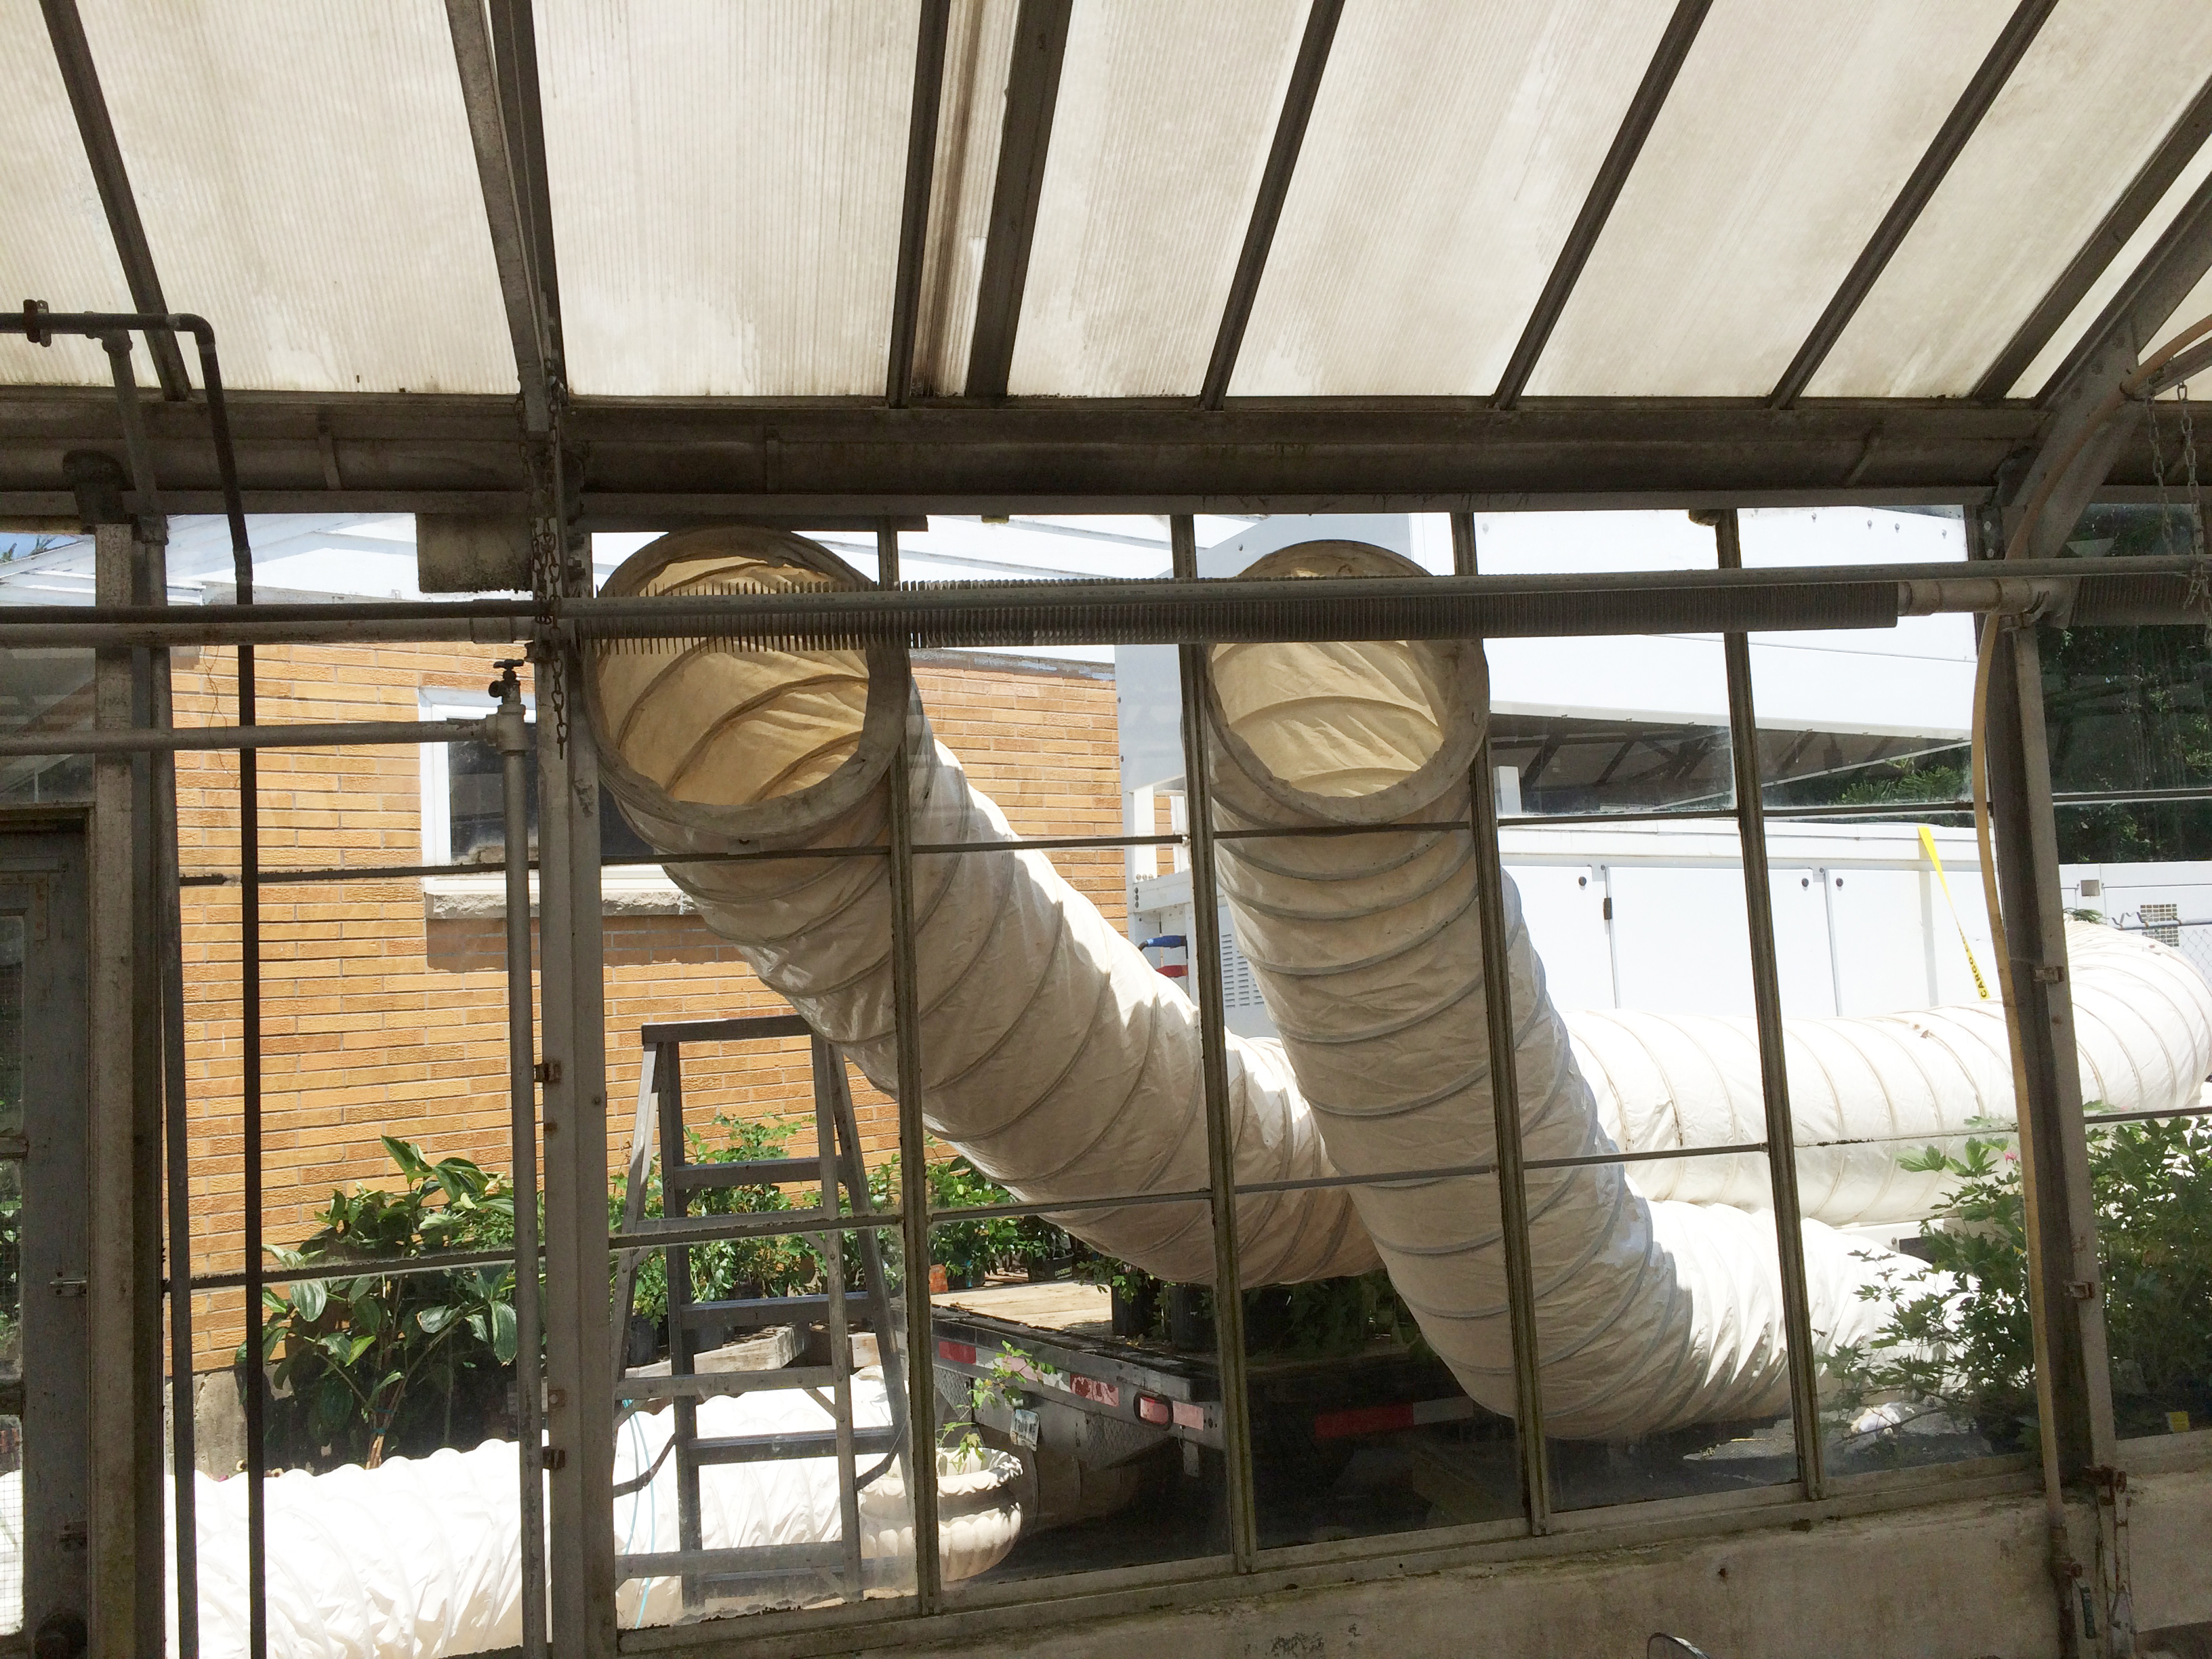 Air Conditioning ducts in window of greenhouse for a wedding in Iowa